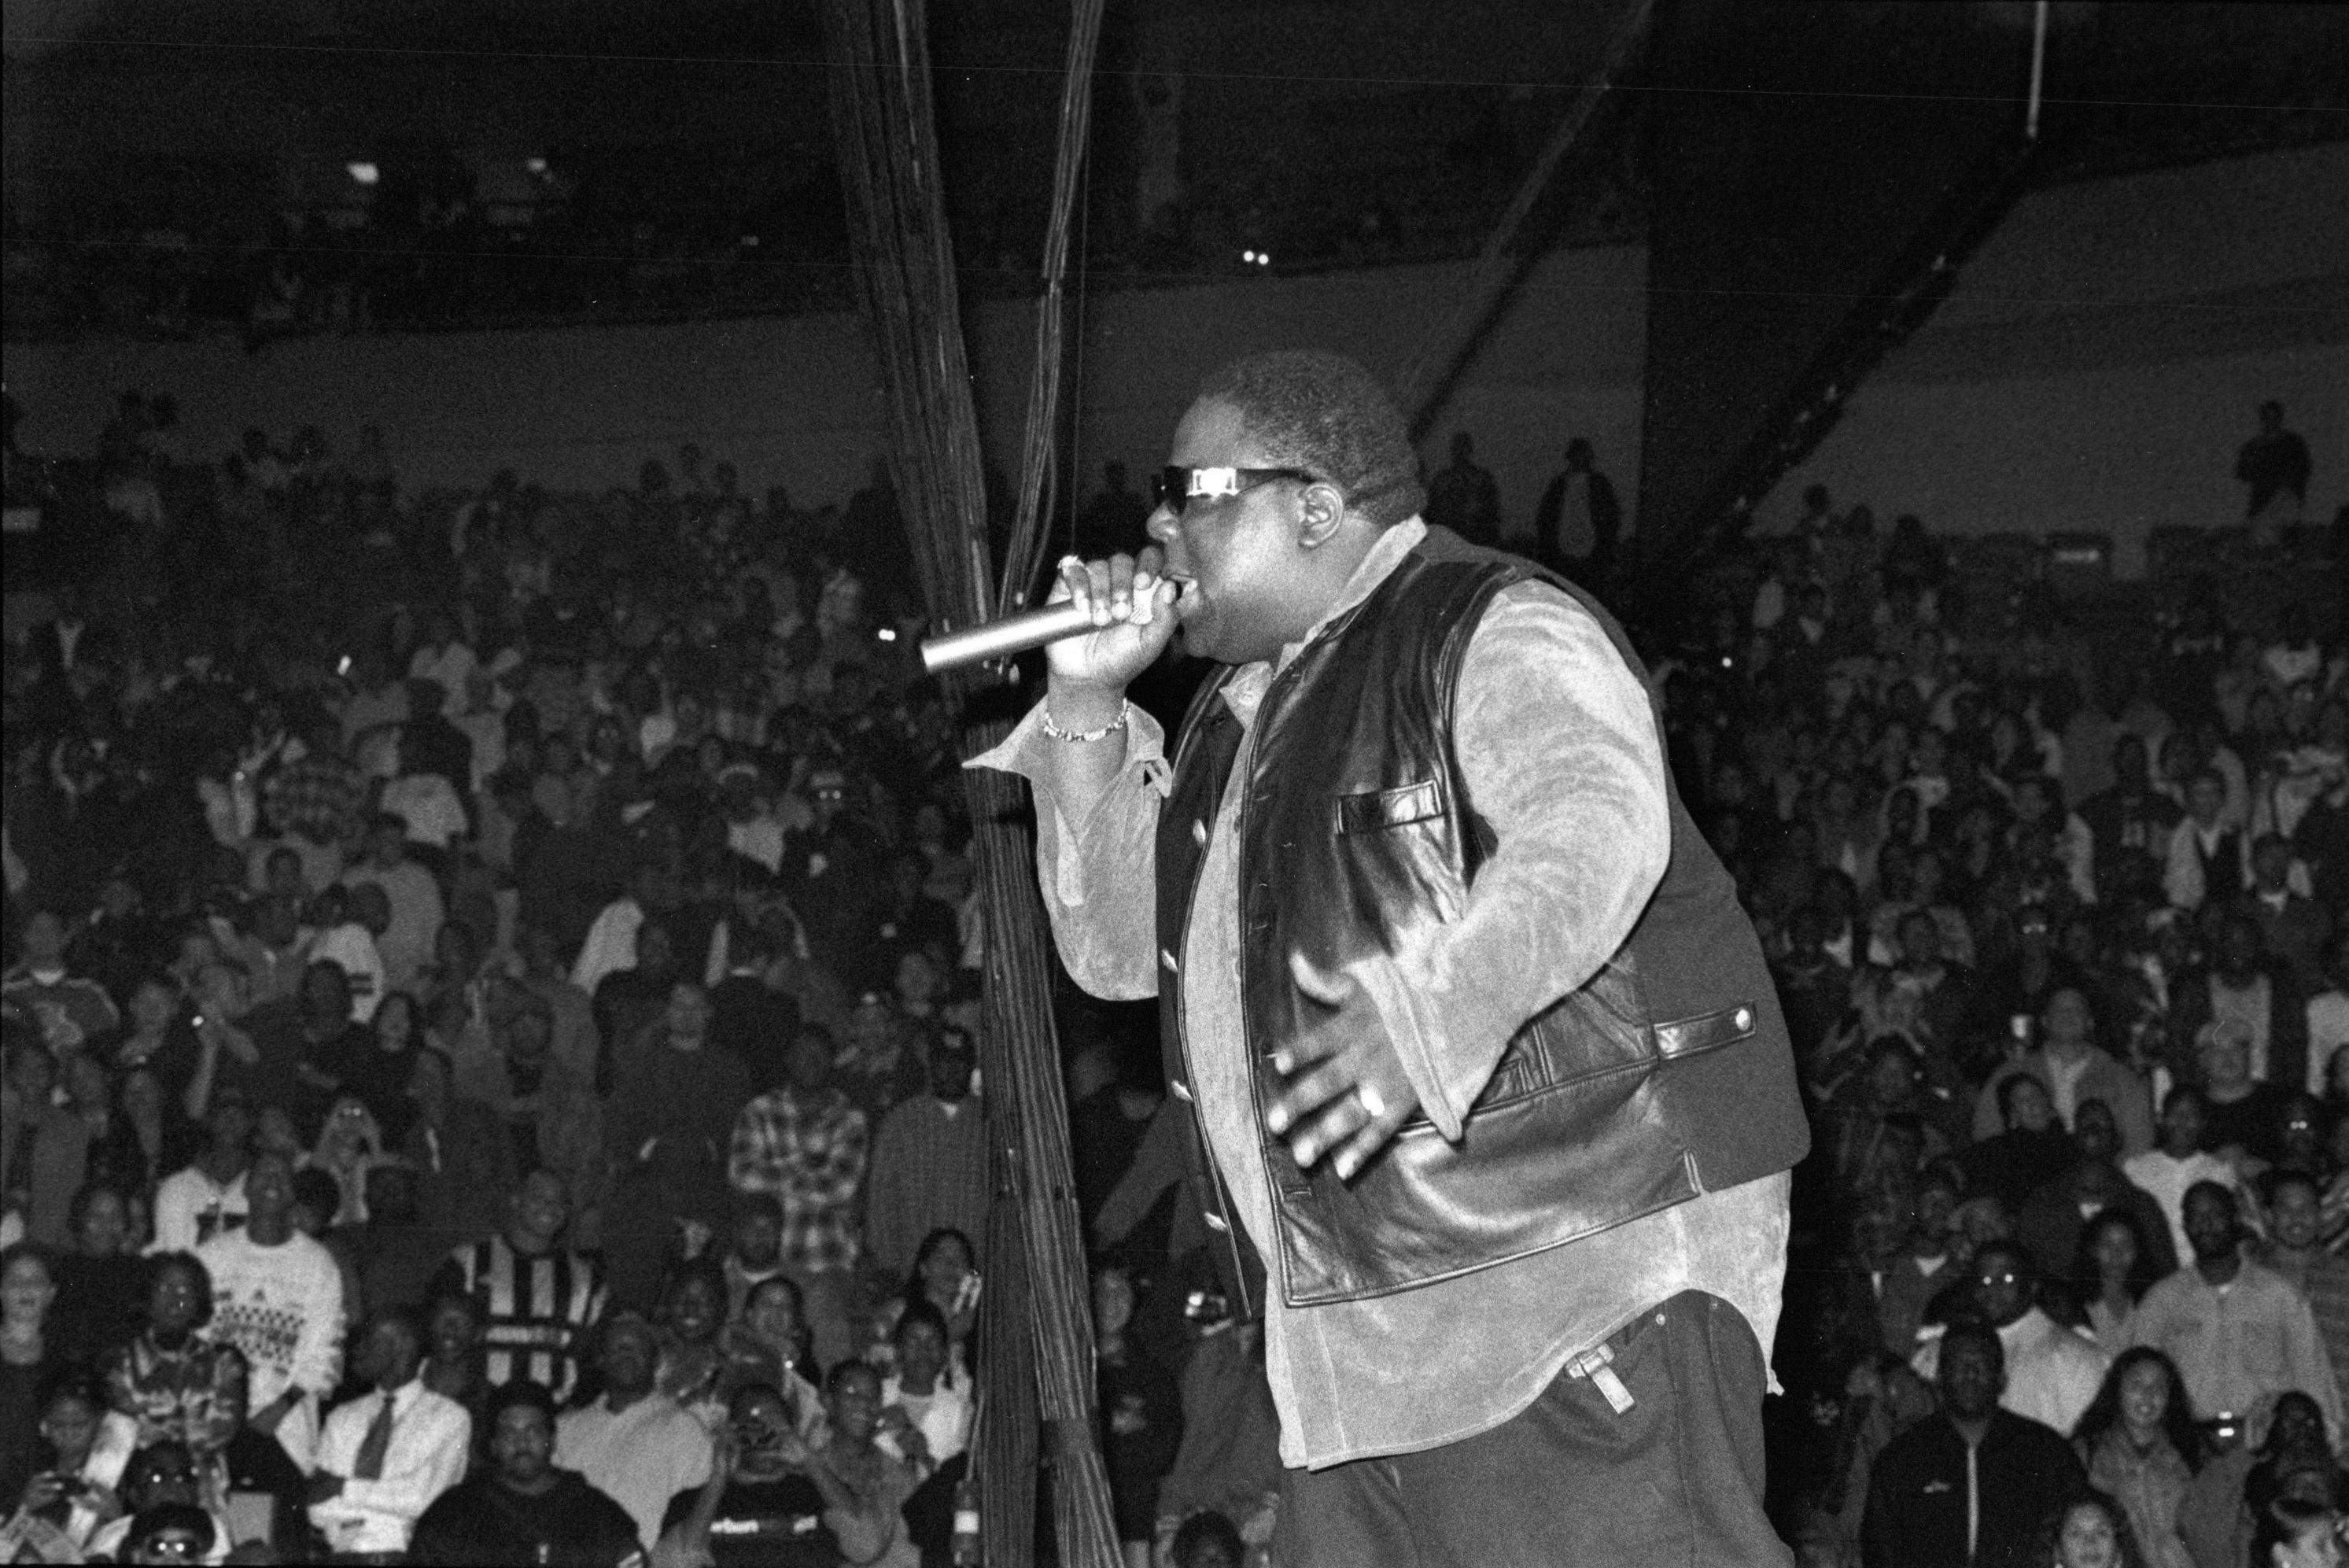 David Corio Portrait Photograph - Notorious B.I.G. Performing on Stage with Mic Vintage Original Photograph